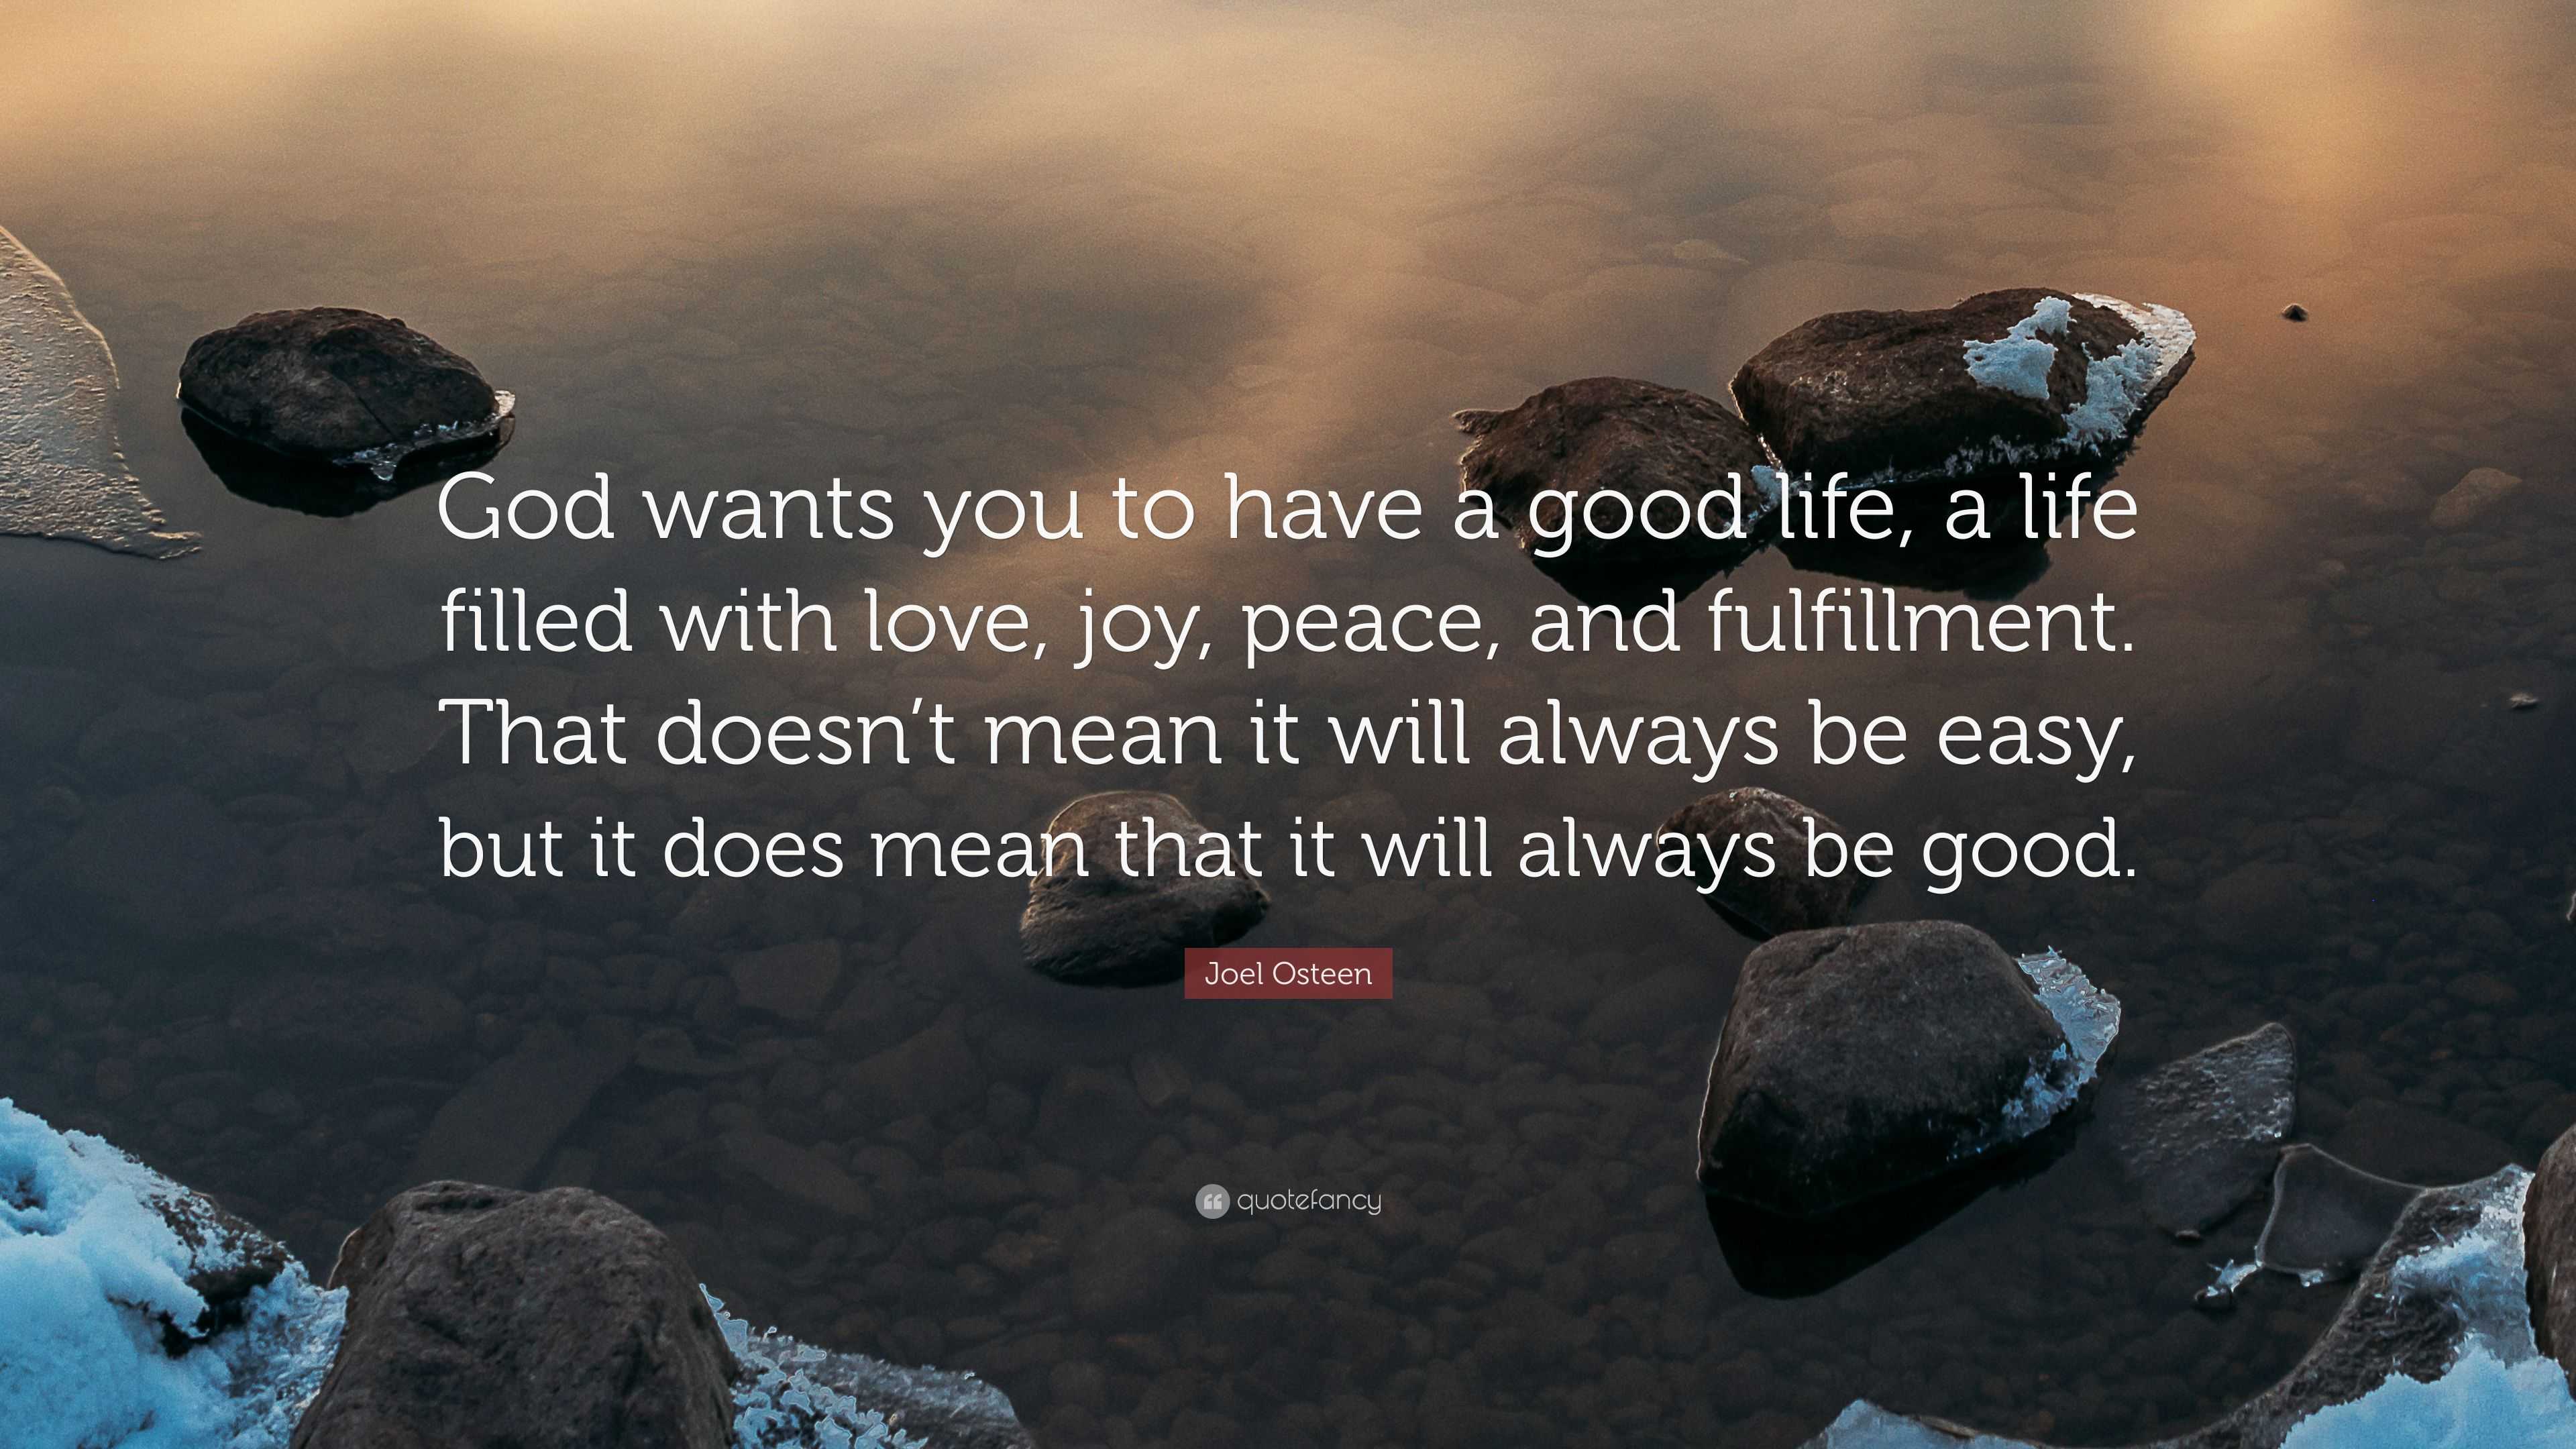 Joel Osteen Quote “God wants you to have a good life a life